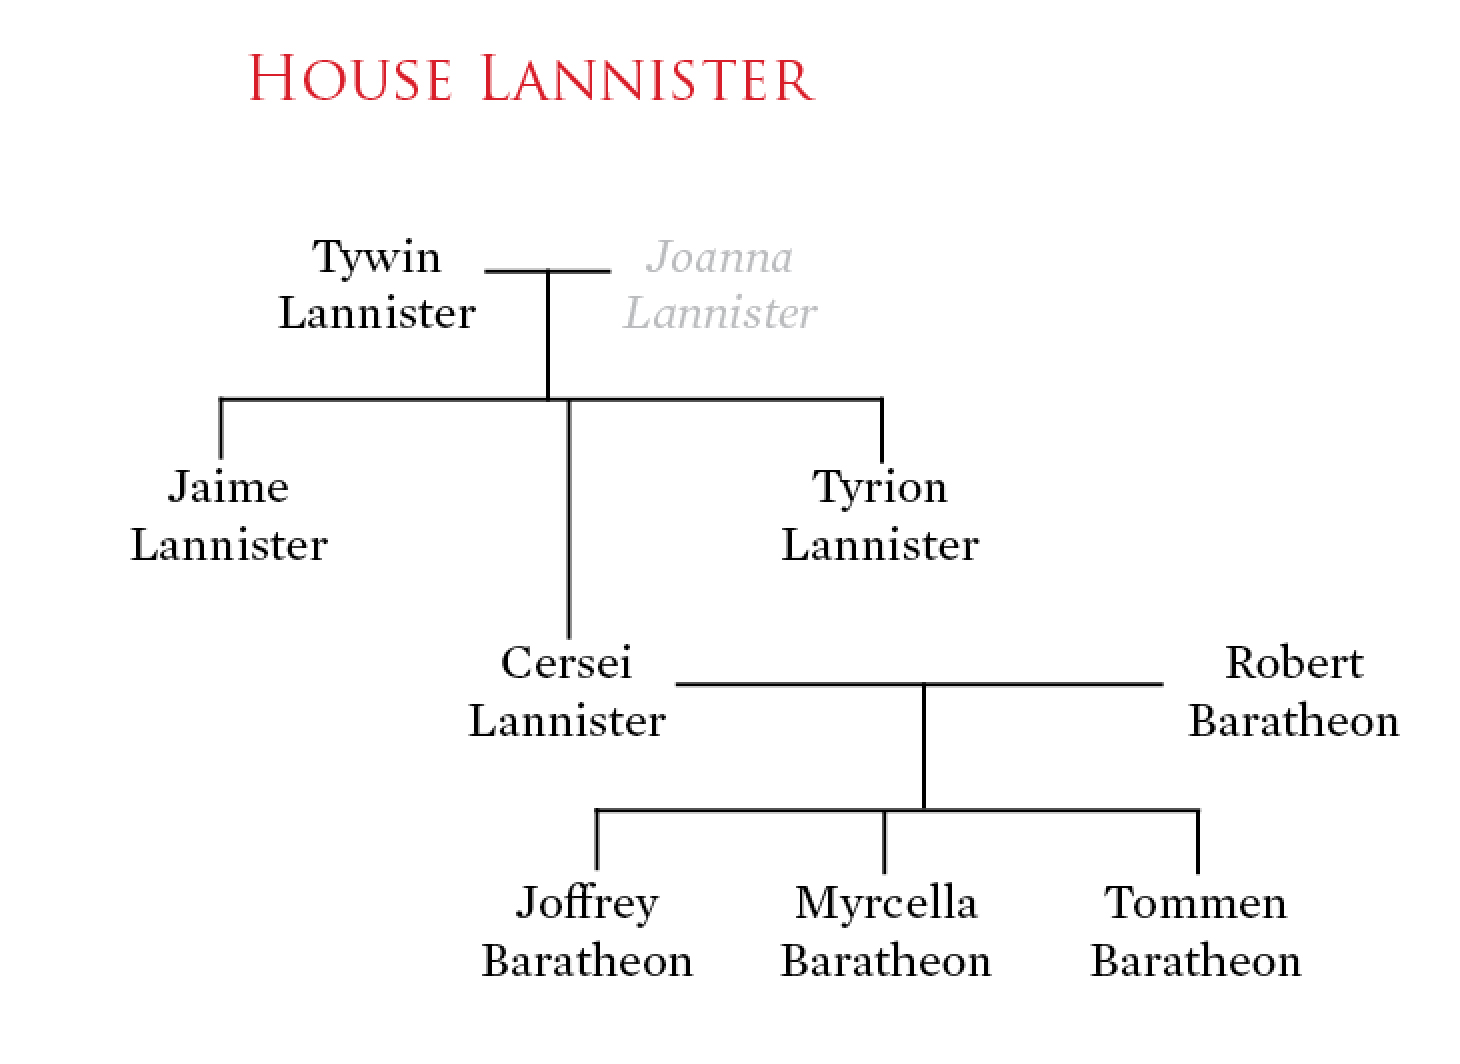 Tywin and his three children often serve as antagonists to the Starks. The Stark-Lannister rivalry is an important part of the series.